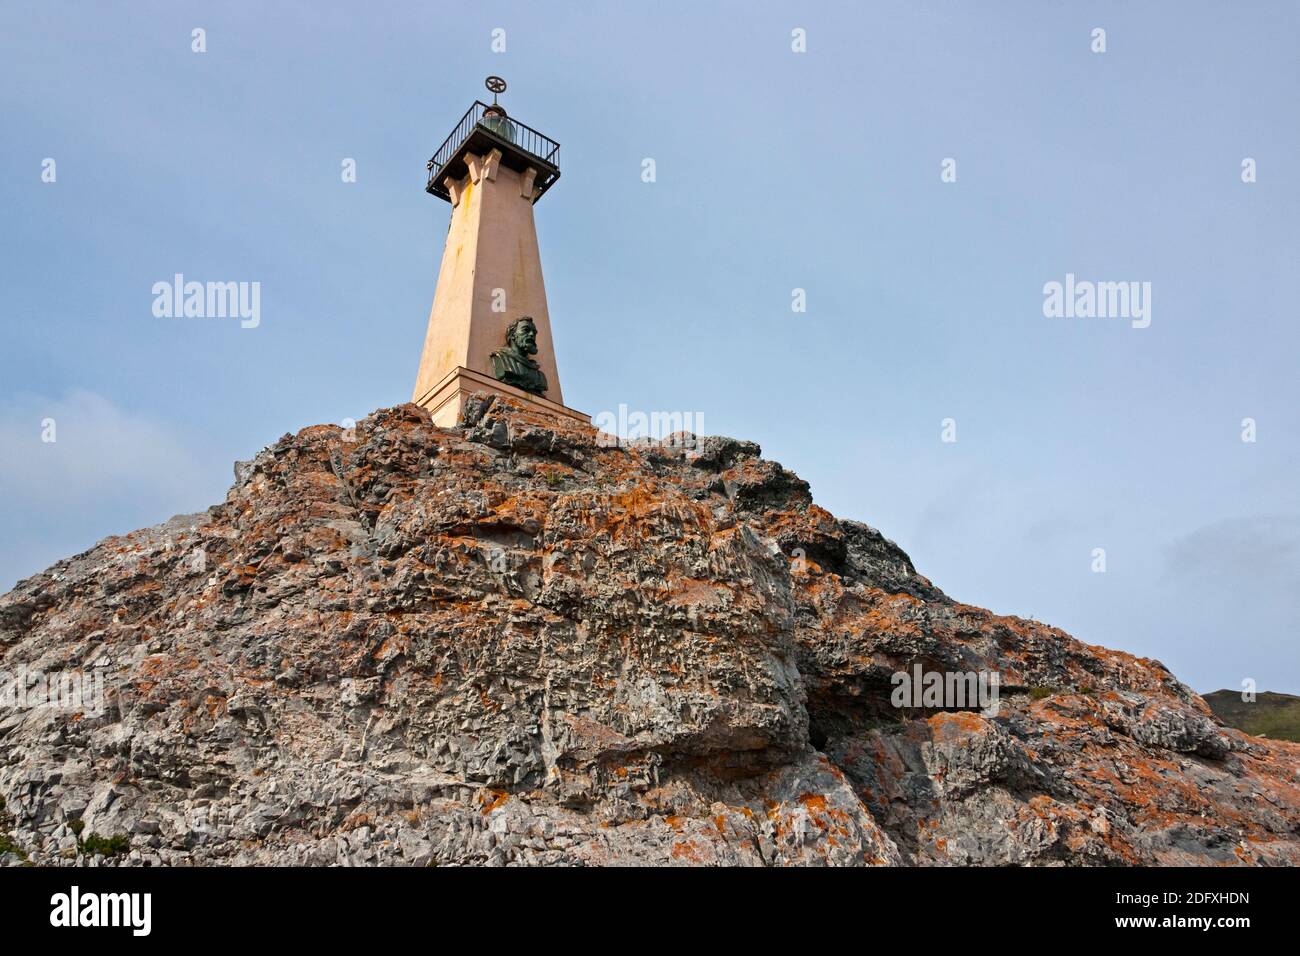 Tomb and monument to Dezhnev, Cape Dezhnev, most eastern corner of Eurasia, Russian Far East Stock Photo